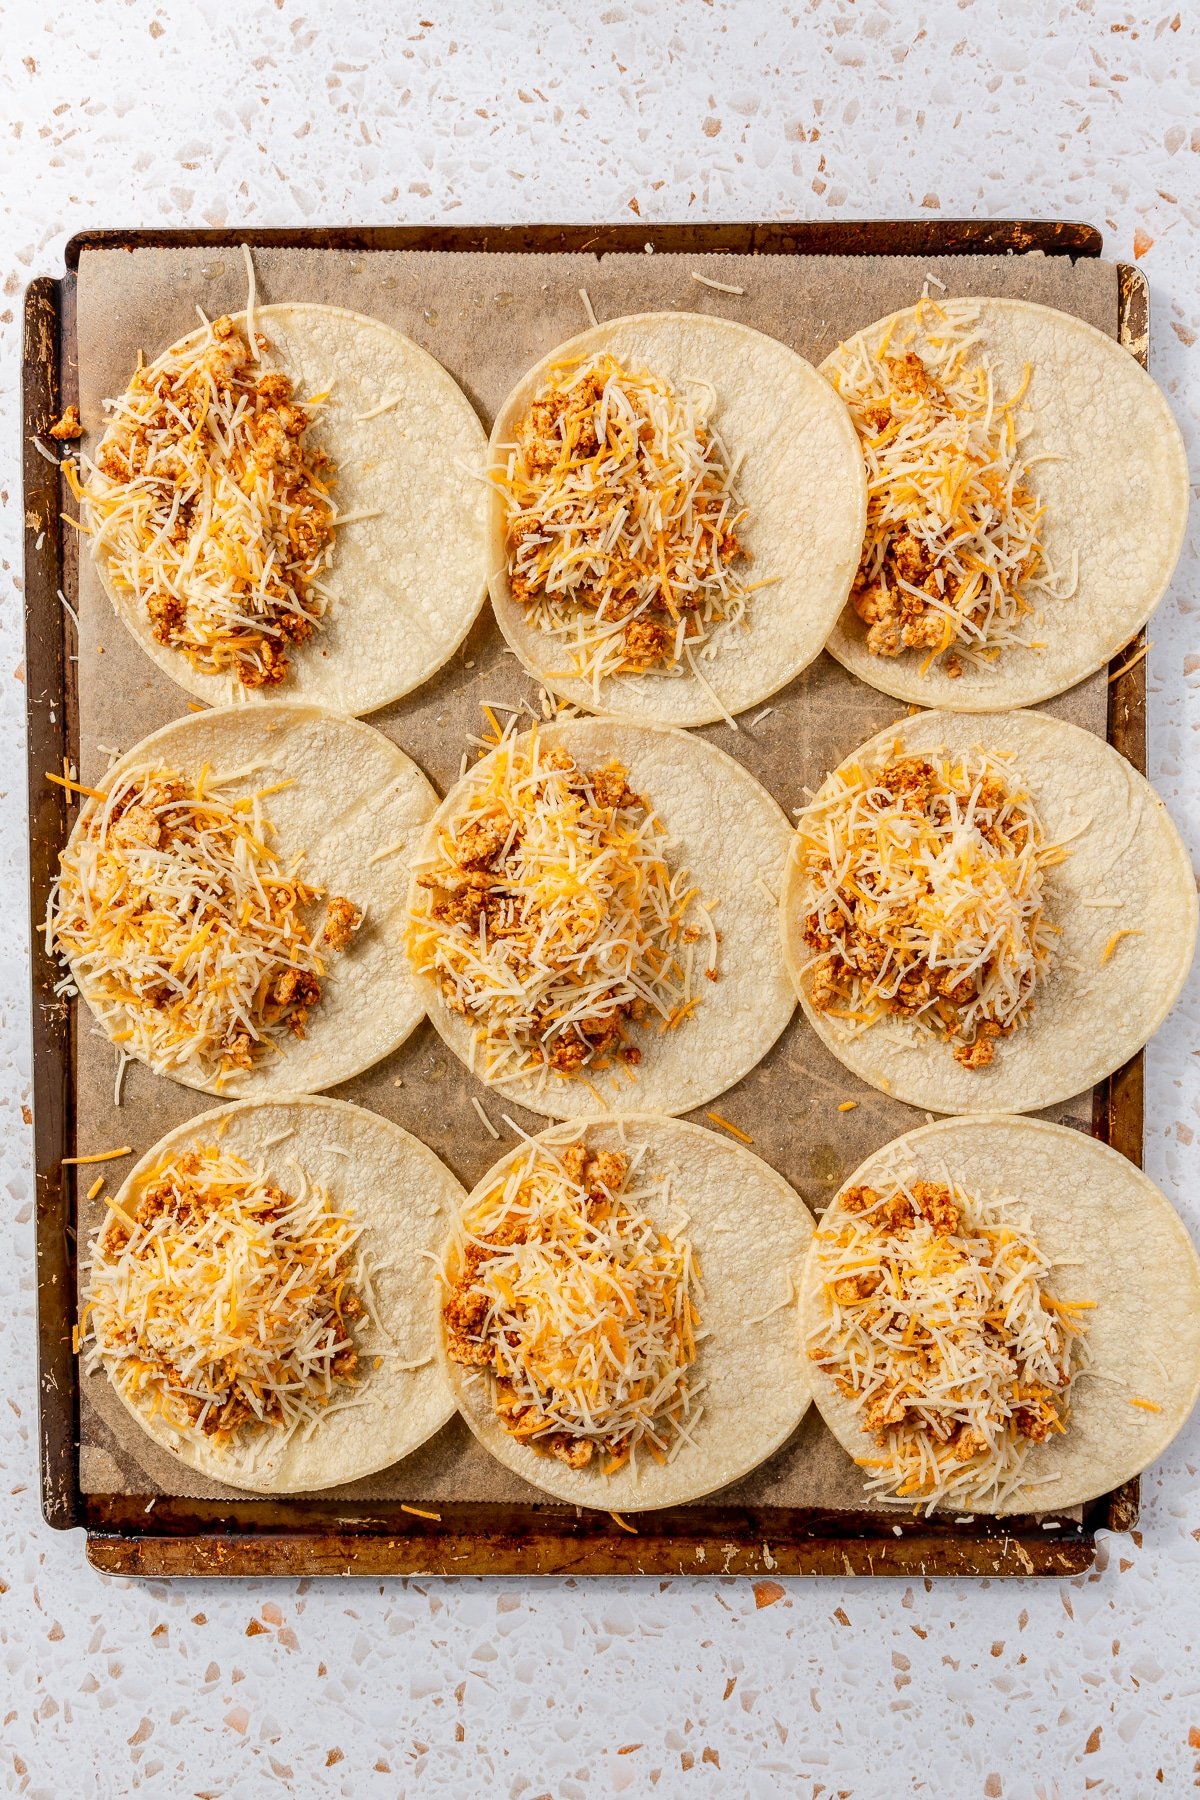 Seasoned ground chicken and shredded cheese have been put on 9 tortillas. They sit on metal baking sheet.